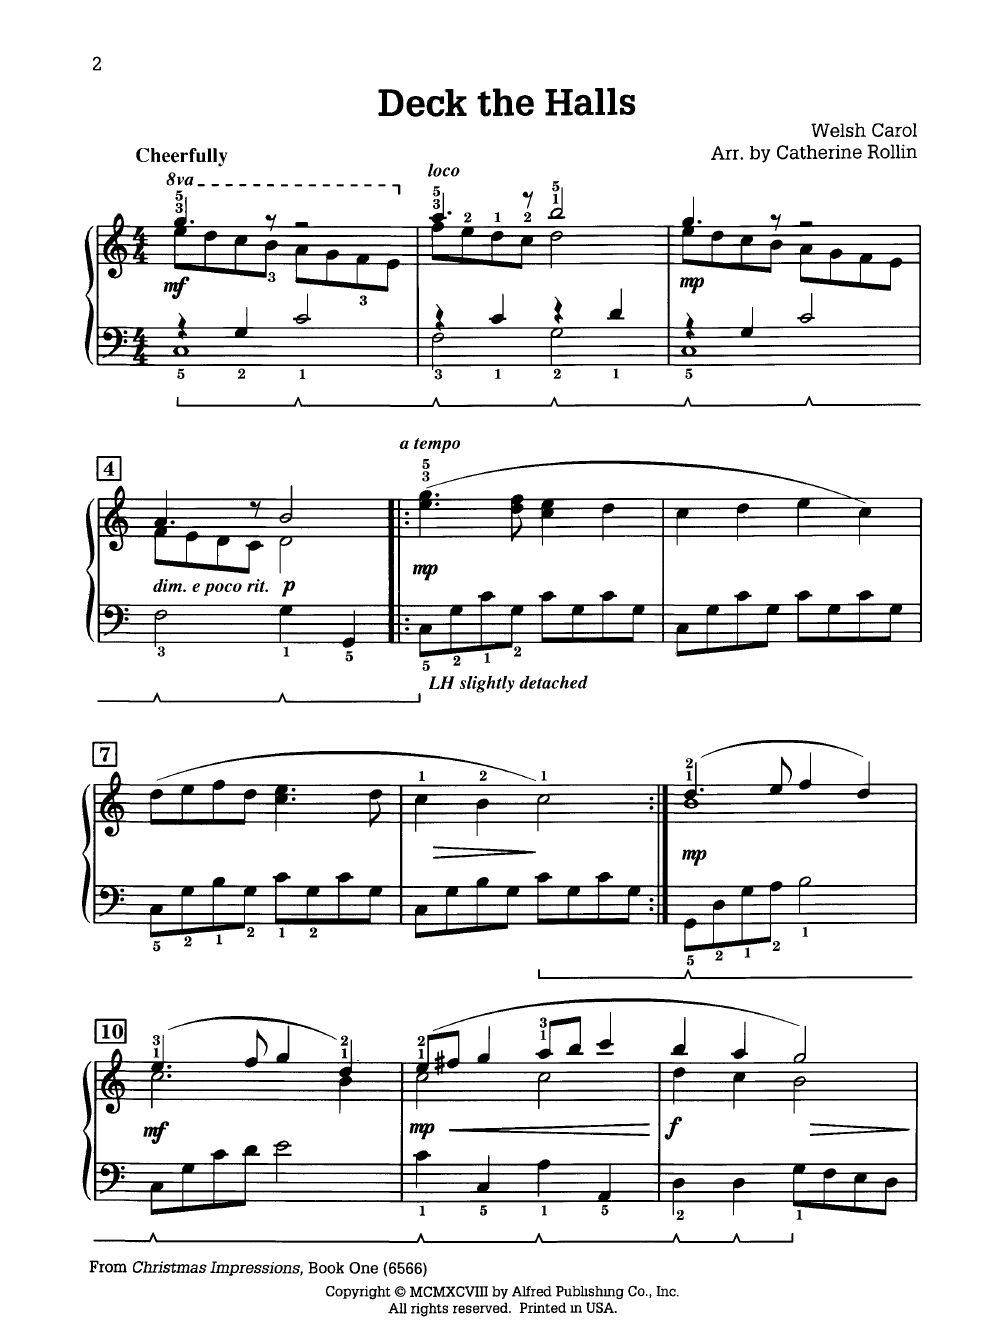 Deck the Halls C major Sheet music for Piano (Solo) Easy